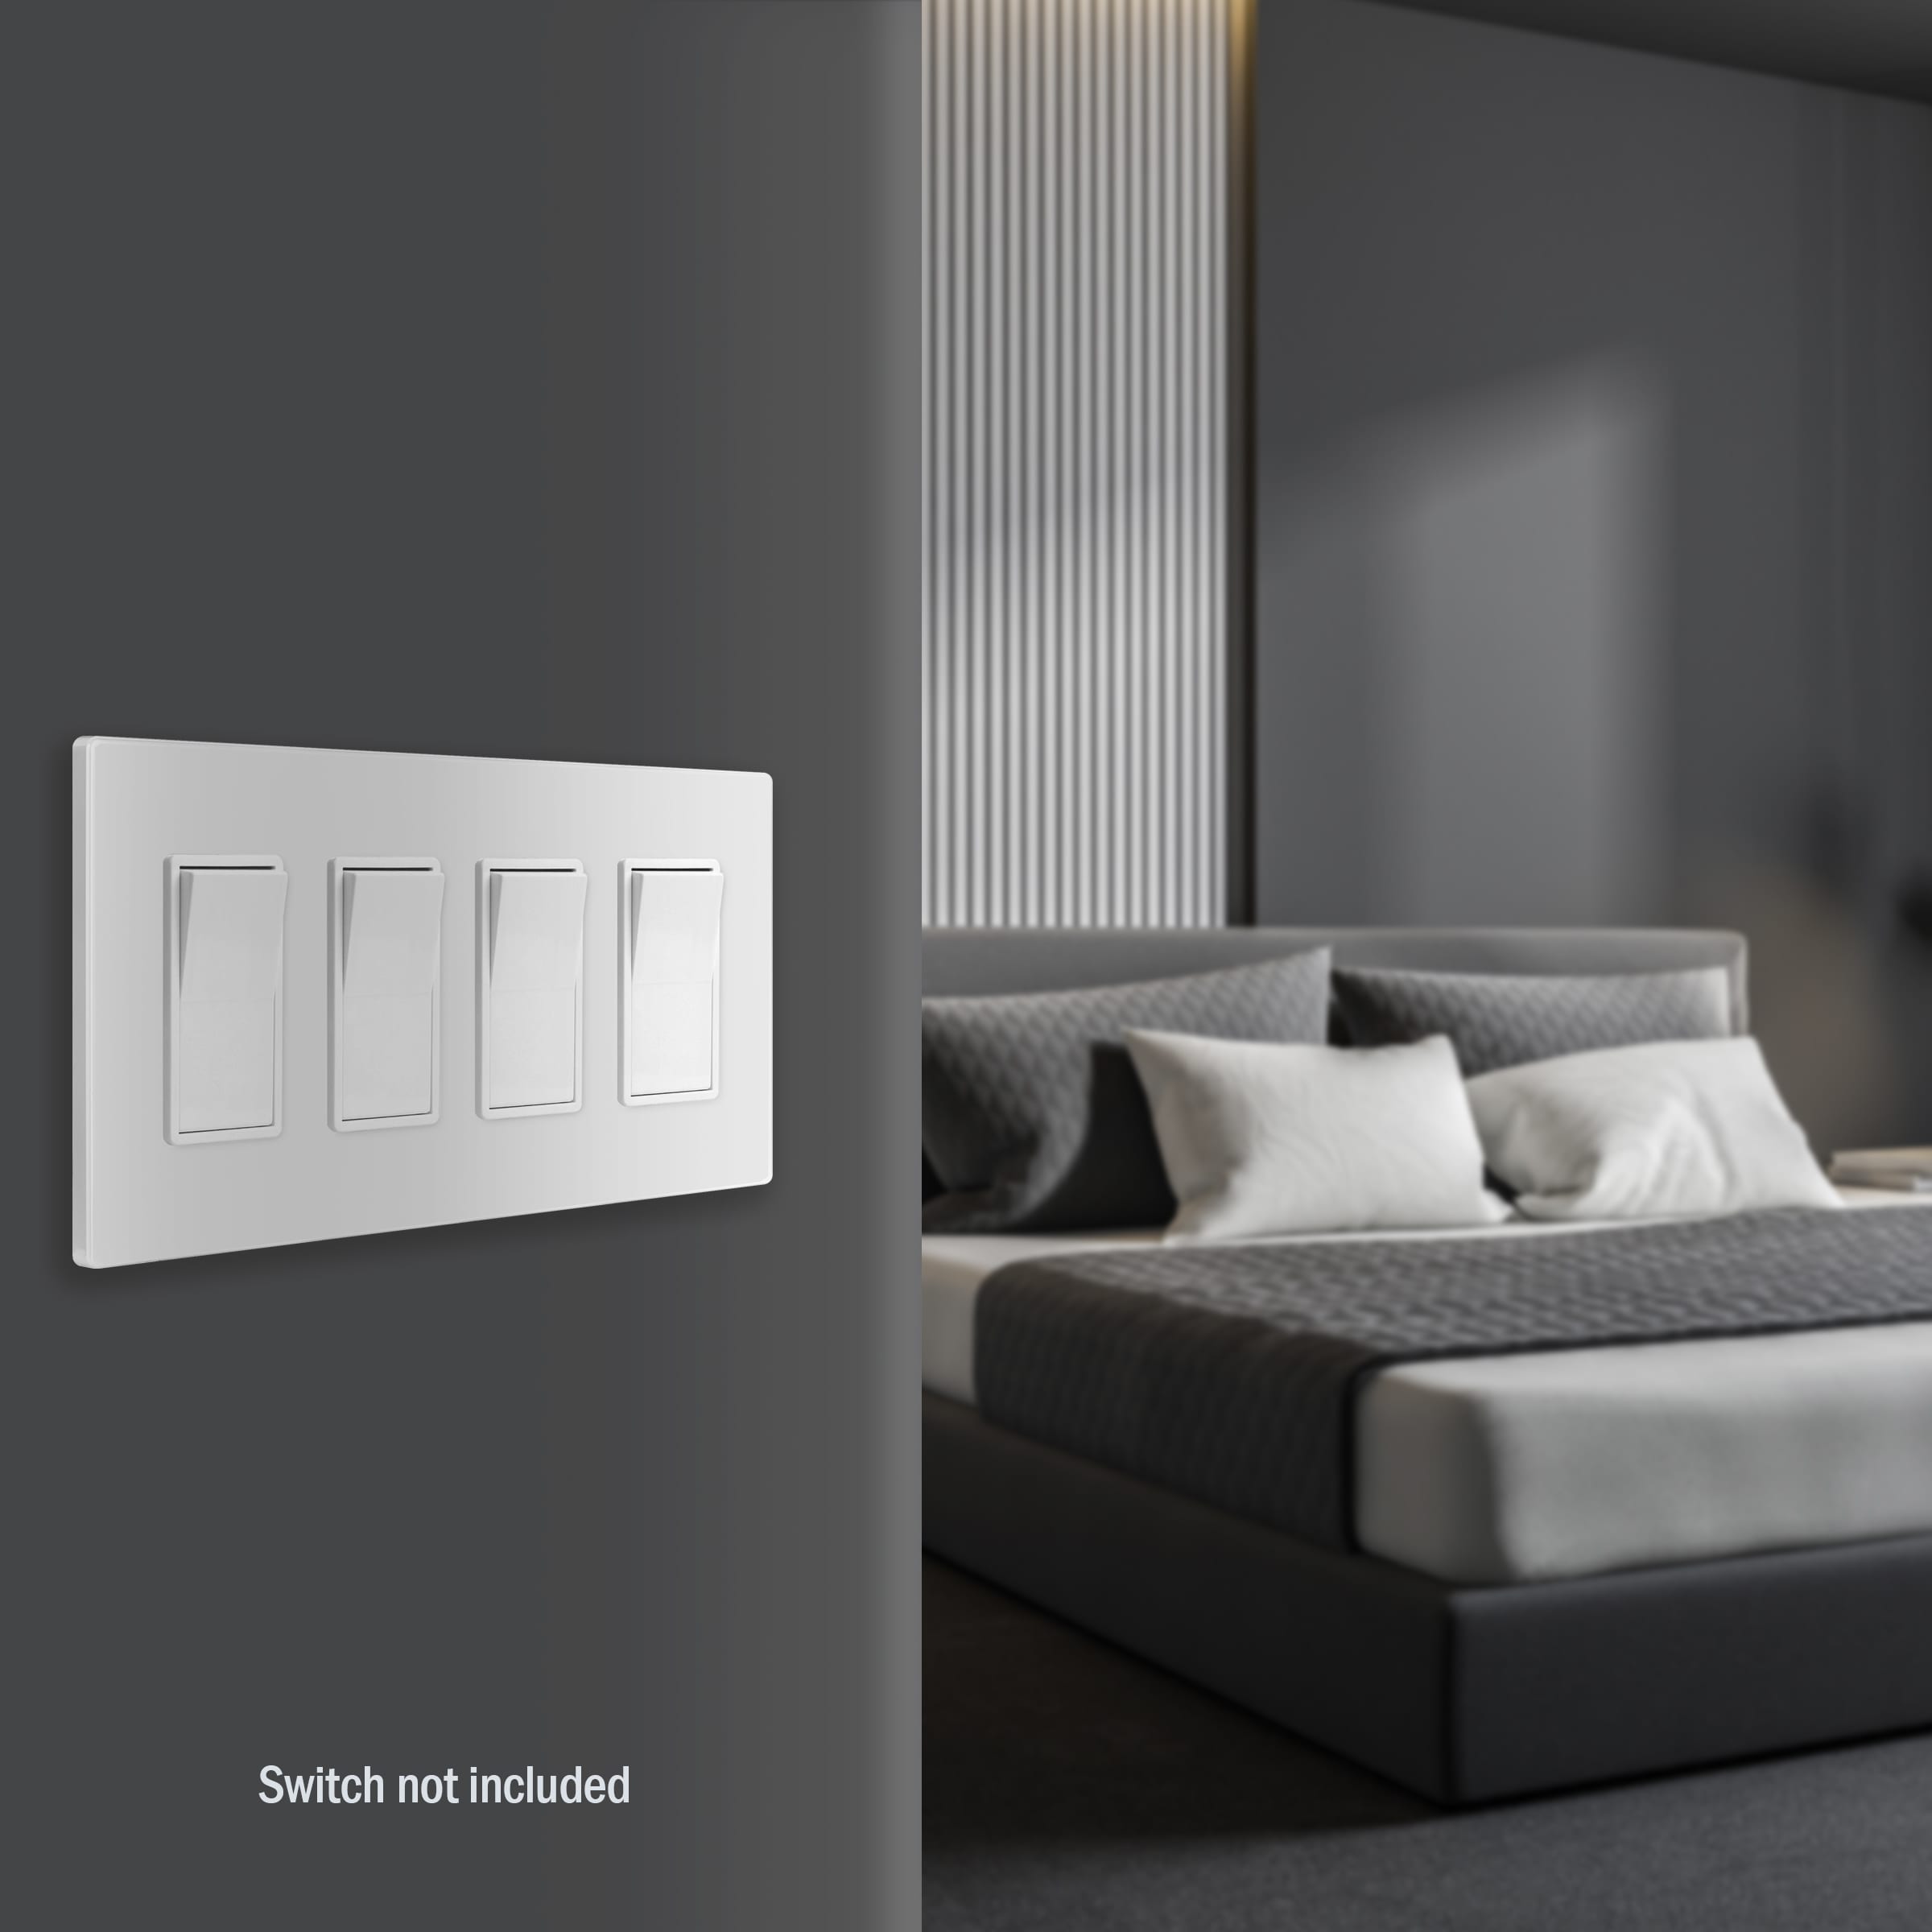 4-Gang Screwless Decorator Switch/Outlet Wall Plate